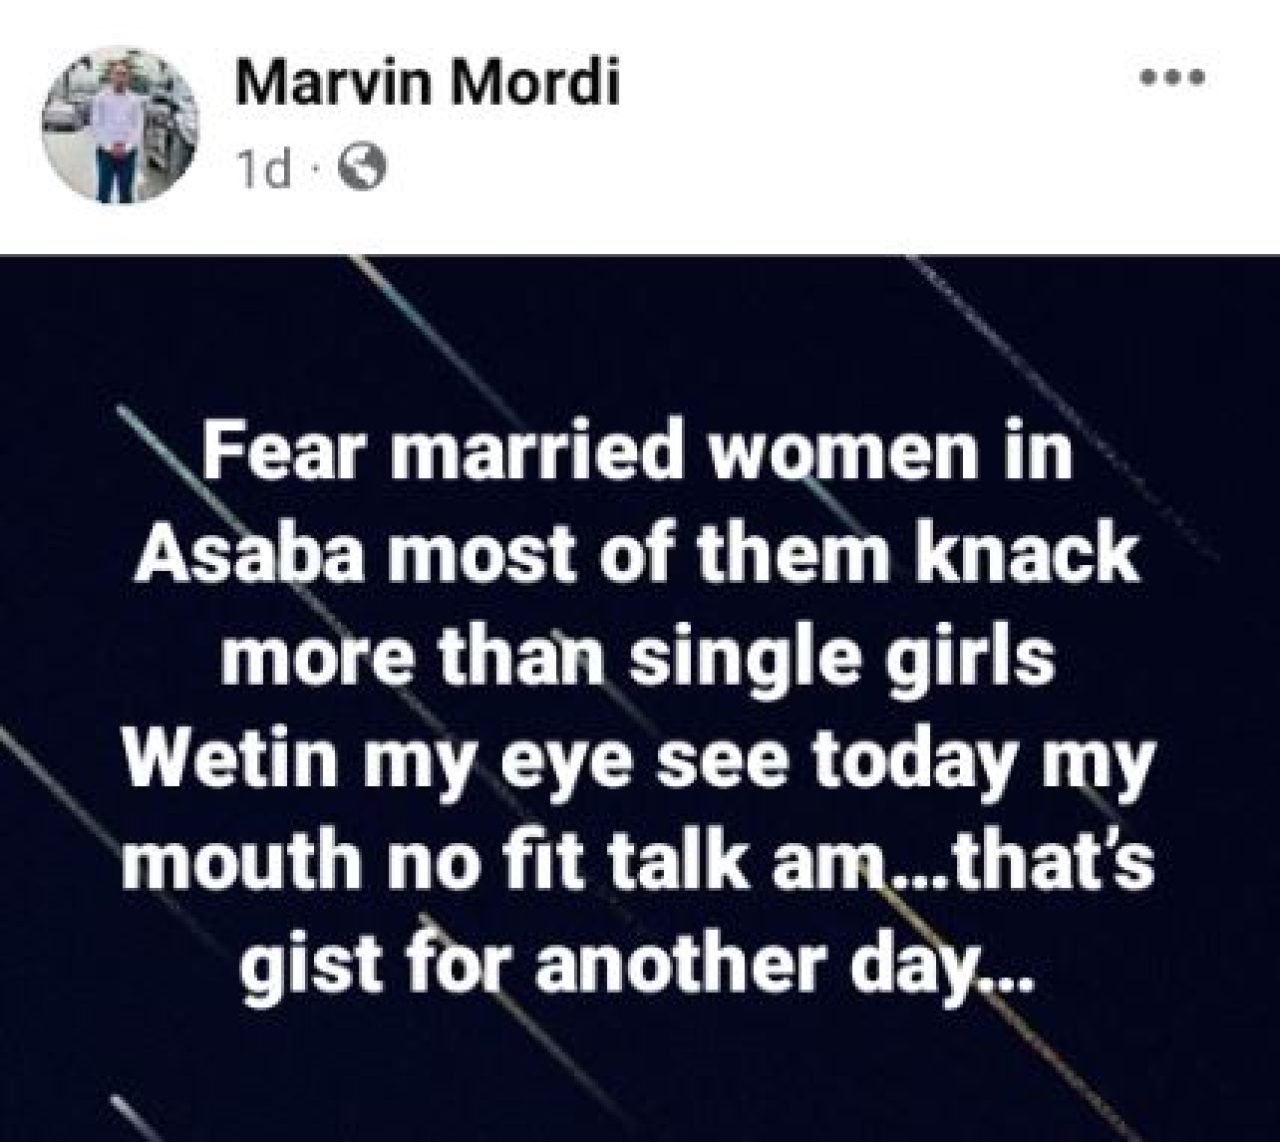 'Fear married women in Asaba' - Nigerian activist expresses shock. AdvertAfrica News on afronewswire.com: Amplifying Africa's Voice | afronewswire.com | Breaking News & Stories